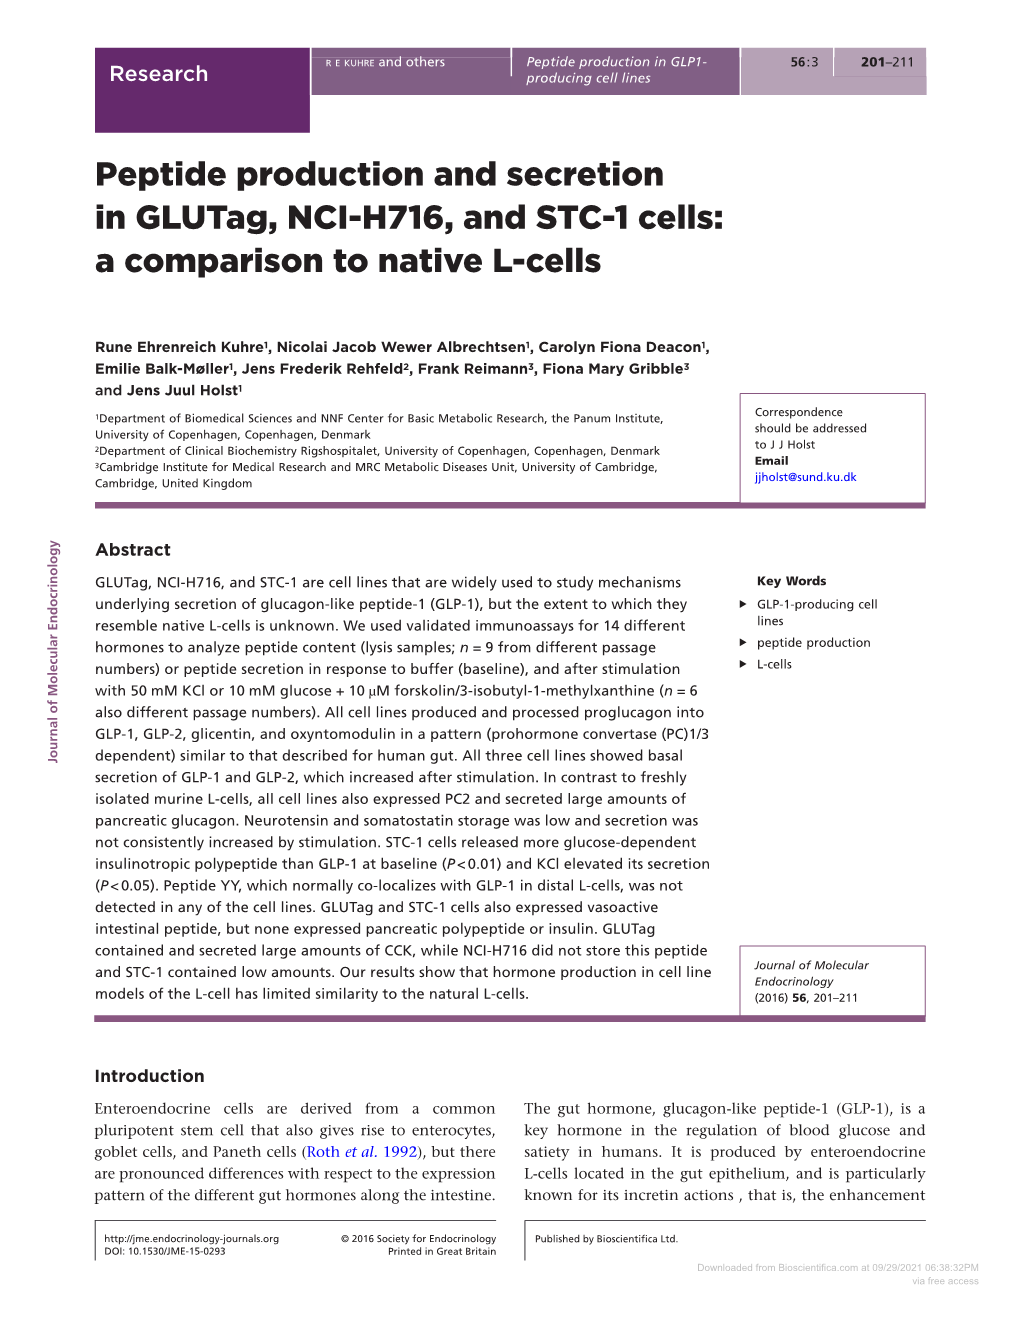 Peptide Production and Secretion in Glutag, NCI-H716, and STC-1 Cells: a Comparison to Native L-Cells